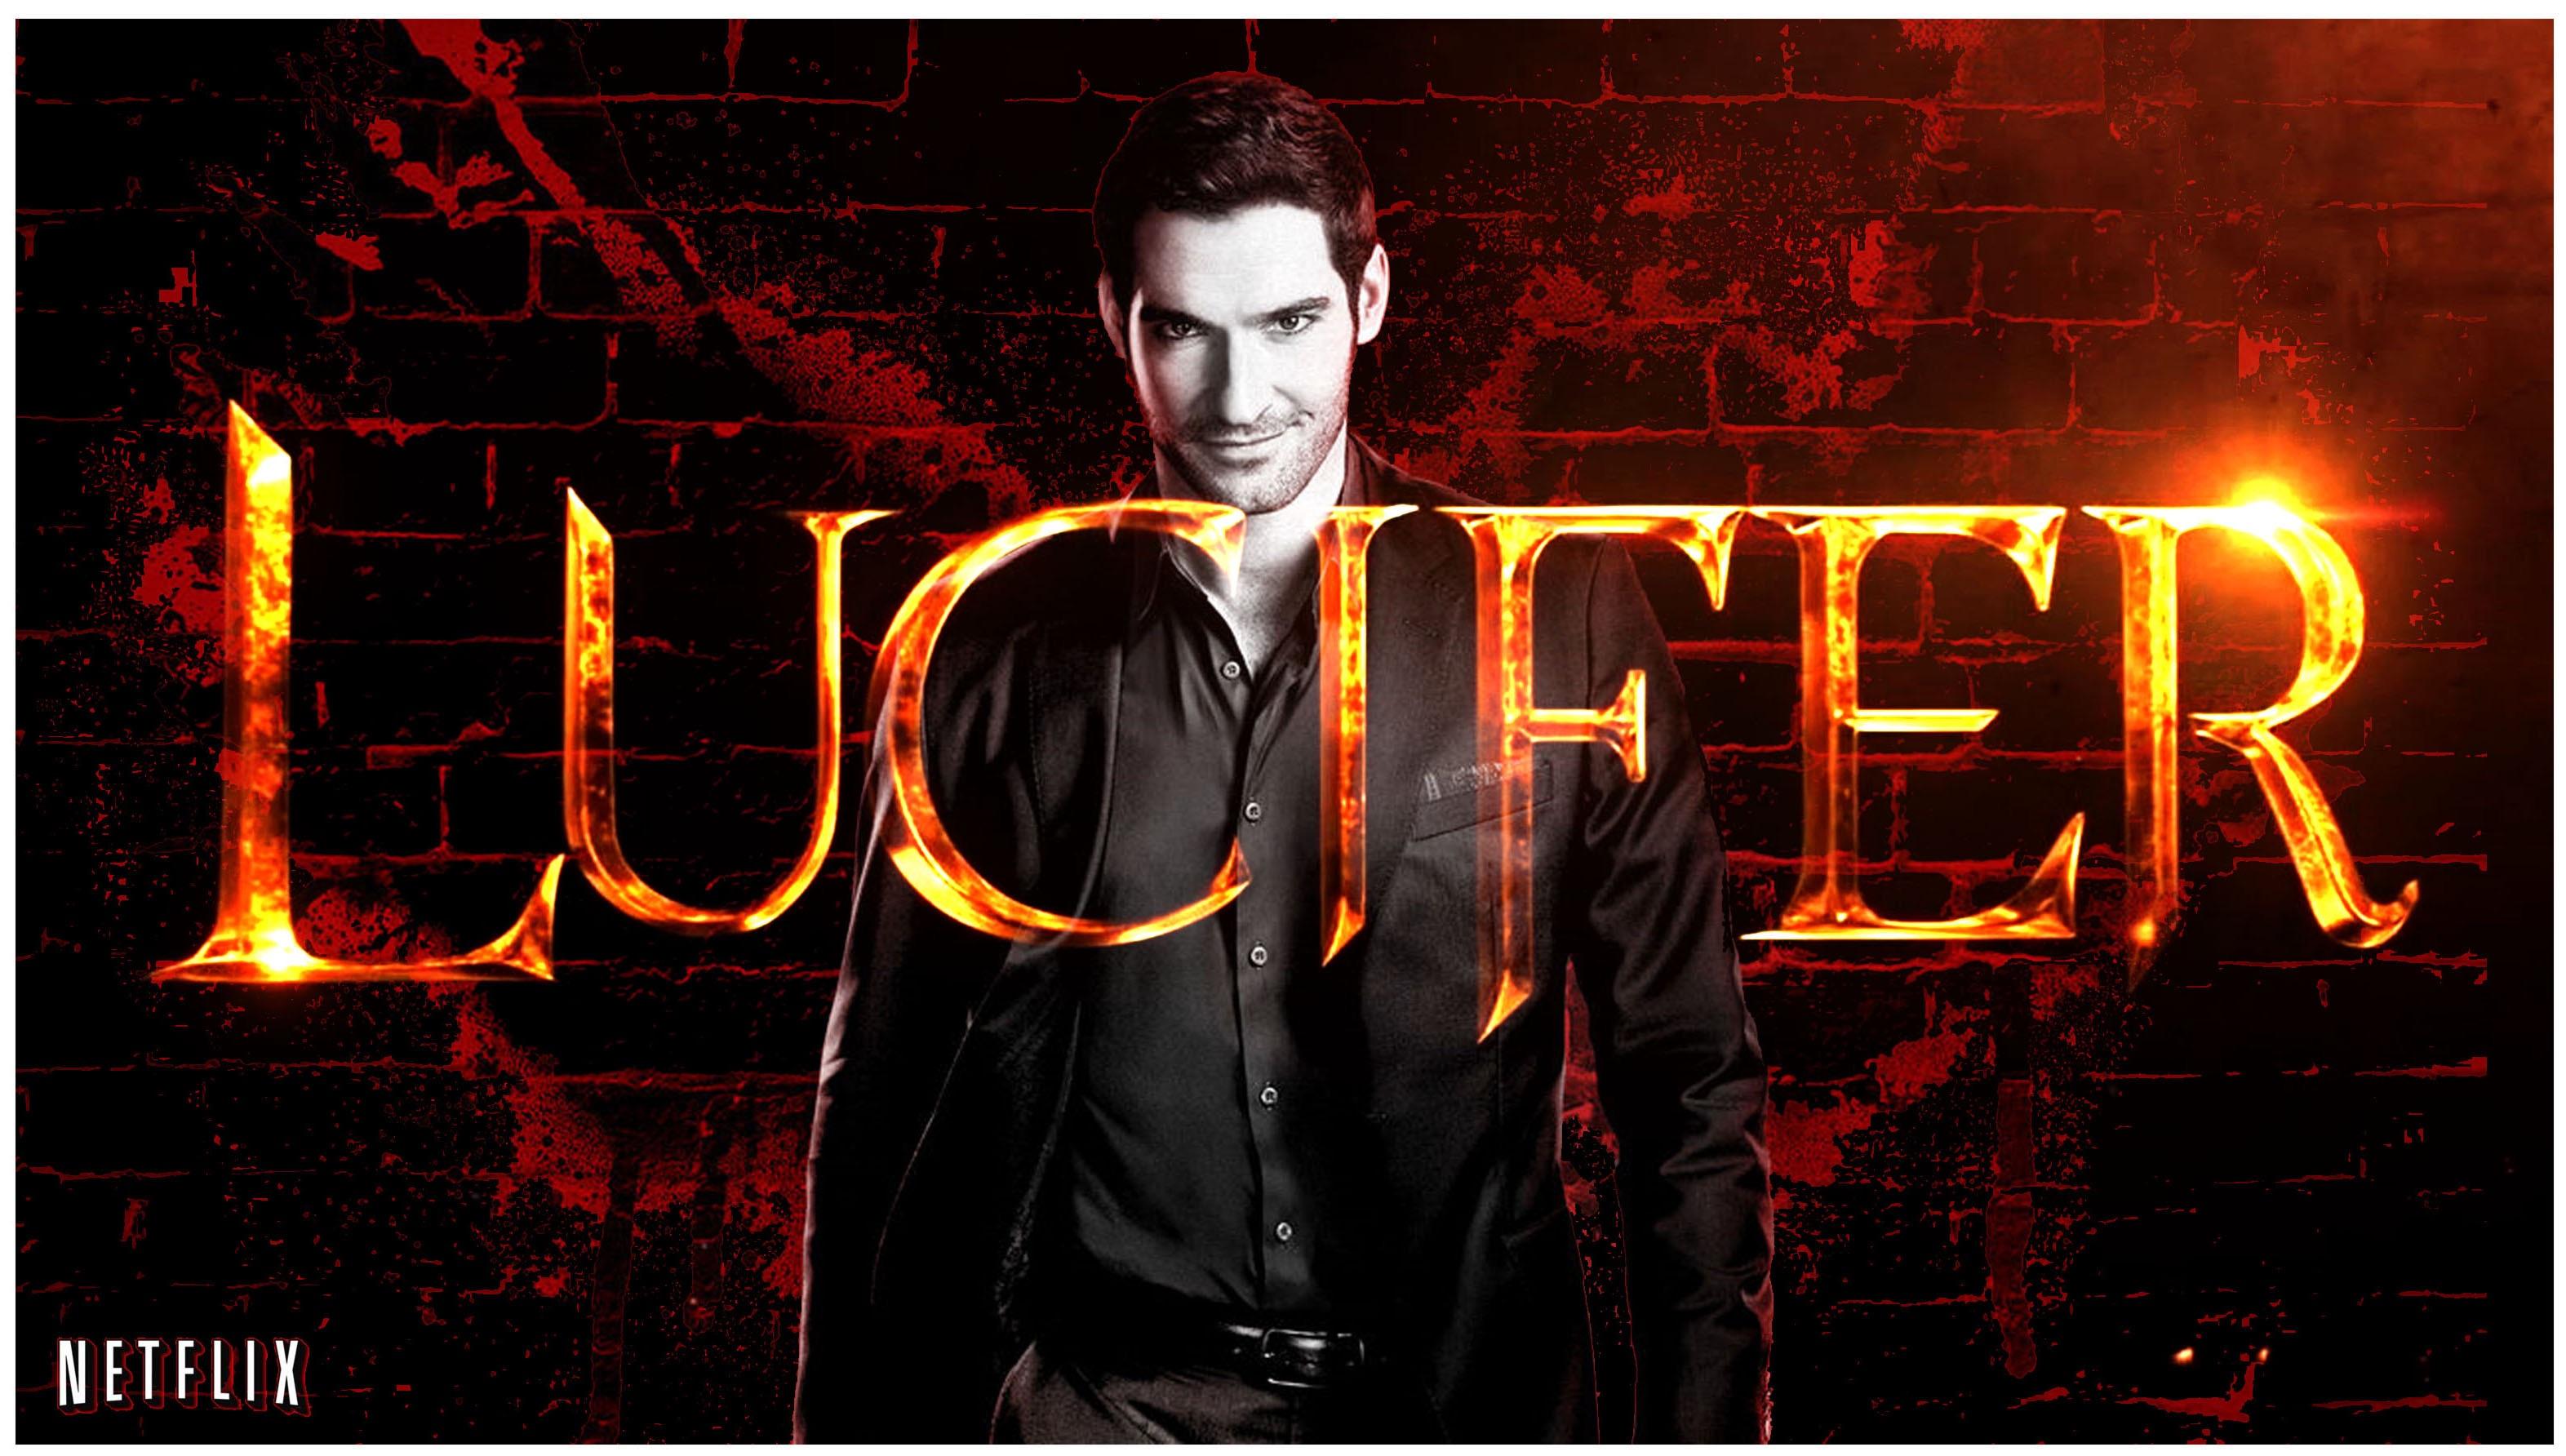 I made Lucifer's Season 2's wallpaper more intimidating. Simple